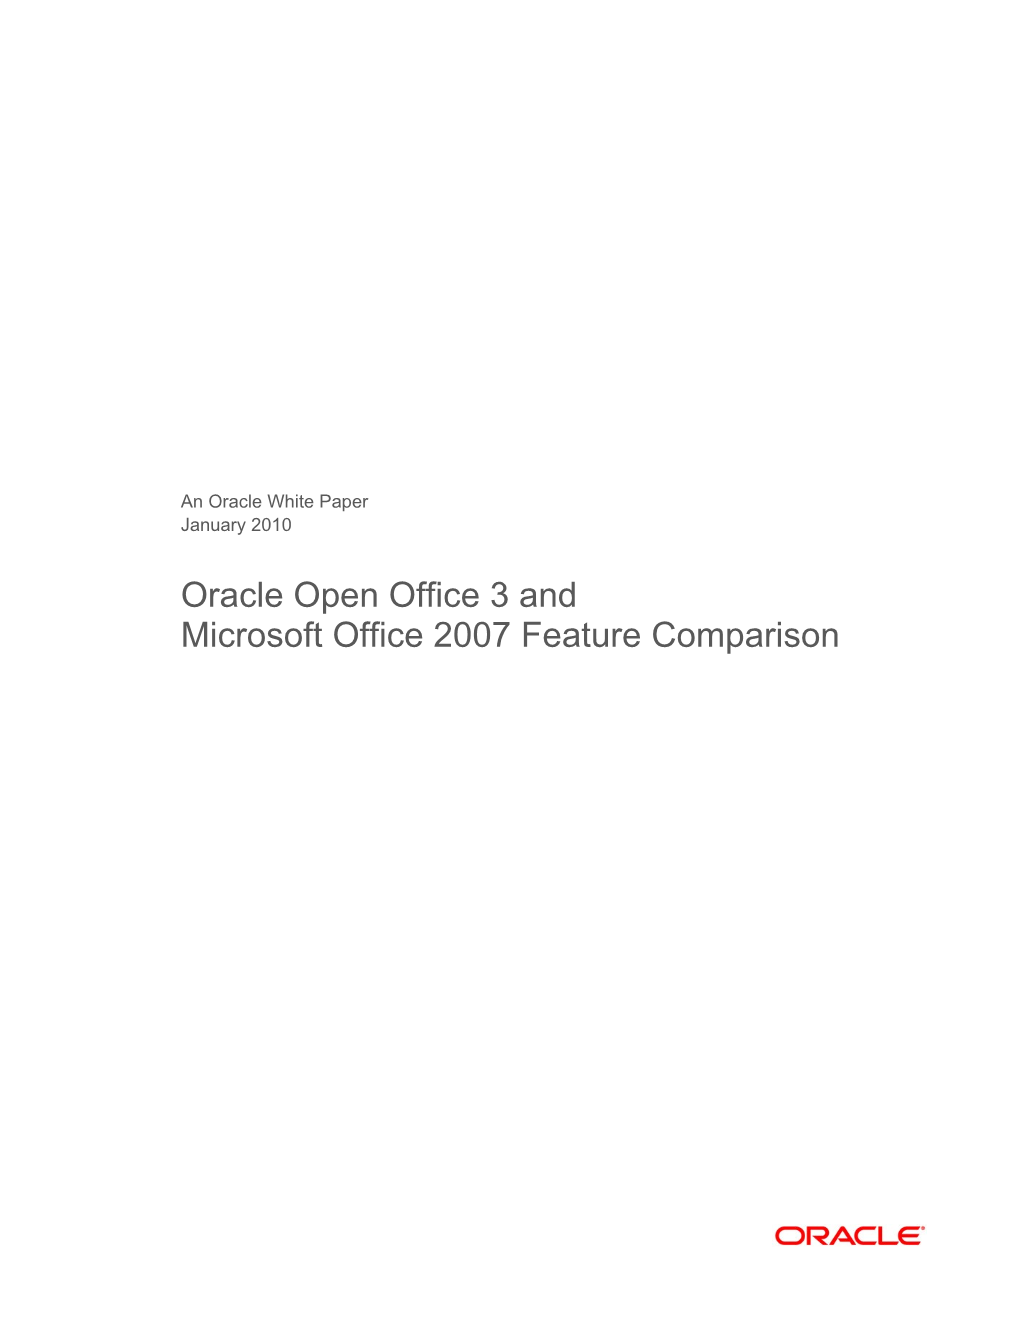 Oracle Open Office 3 and Microsoft Windows 2007 Feature